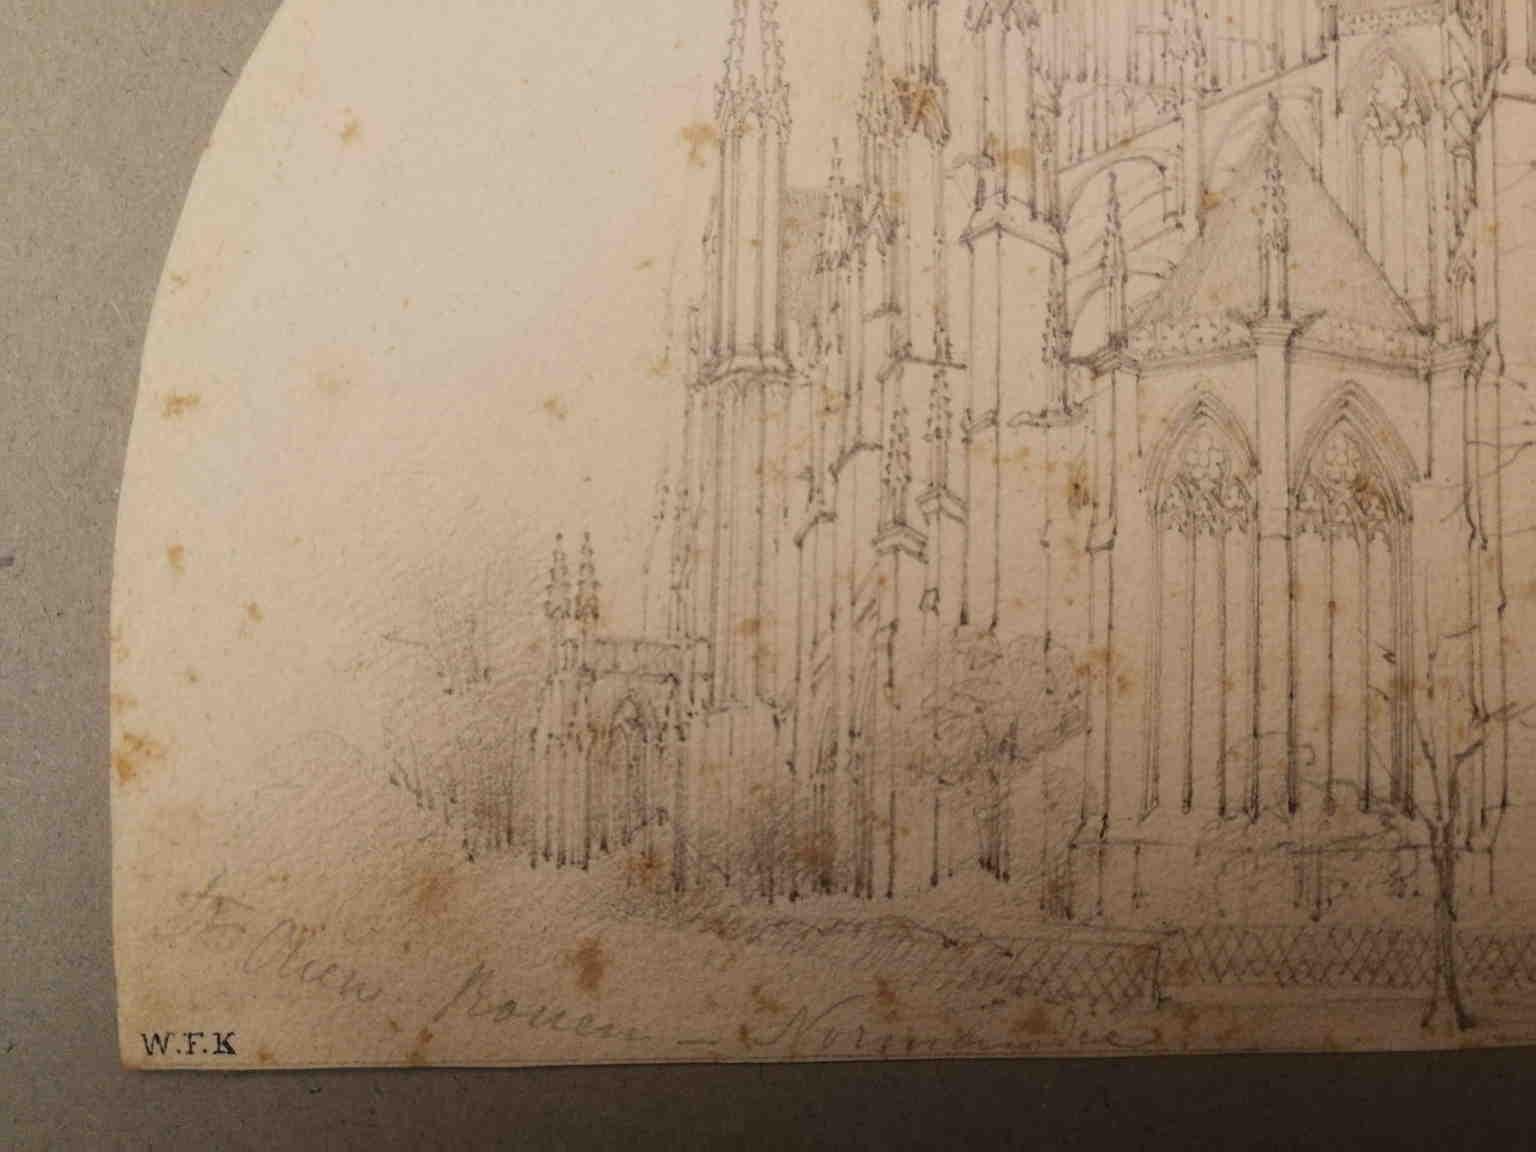 This small drawing shaped as a lunette (pencil on paper, 13 x 19 cm) represents Saint-Ouen Abbey in Rouen, Normandie, as it's reported on pencil on the bottom left corner.
We can desume it's a study from real by the faithful attention of the details